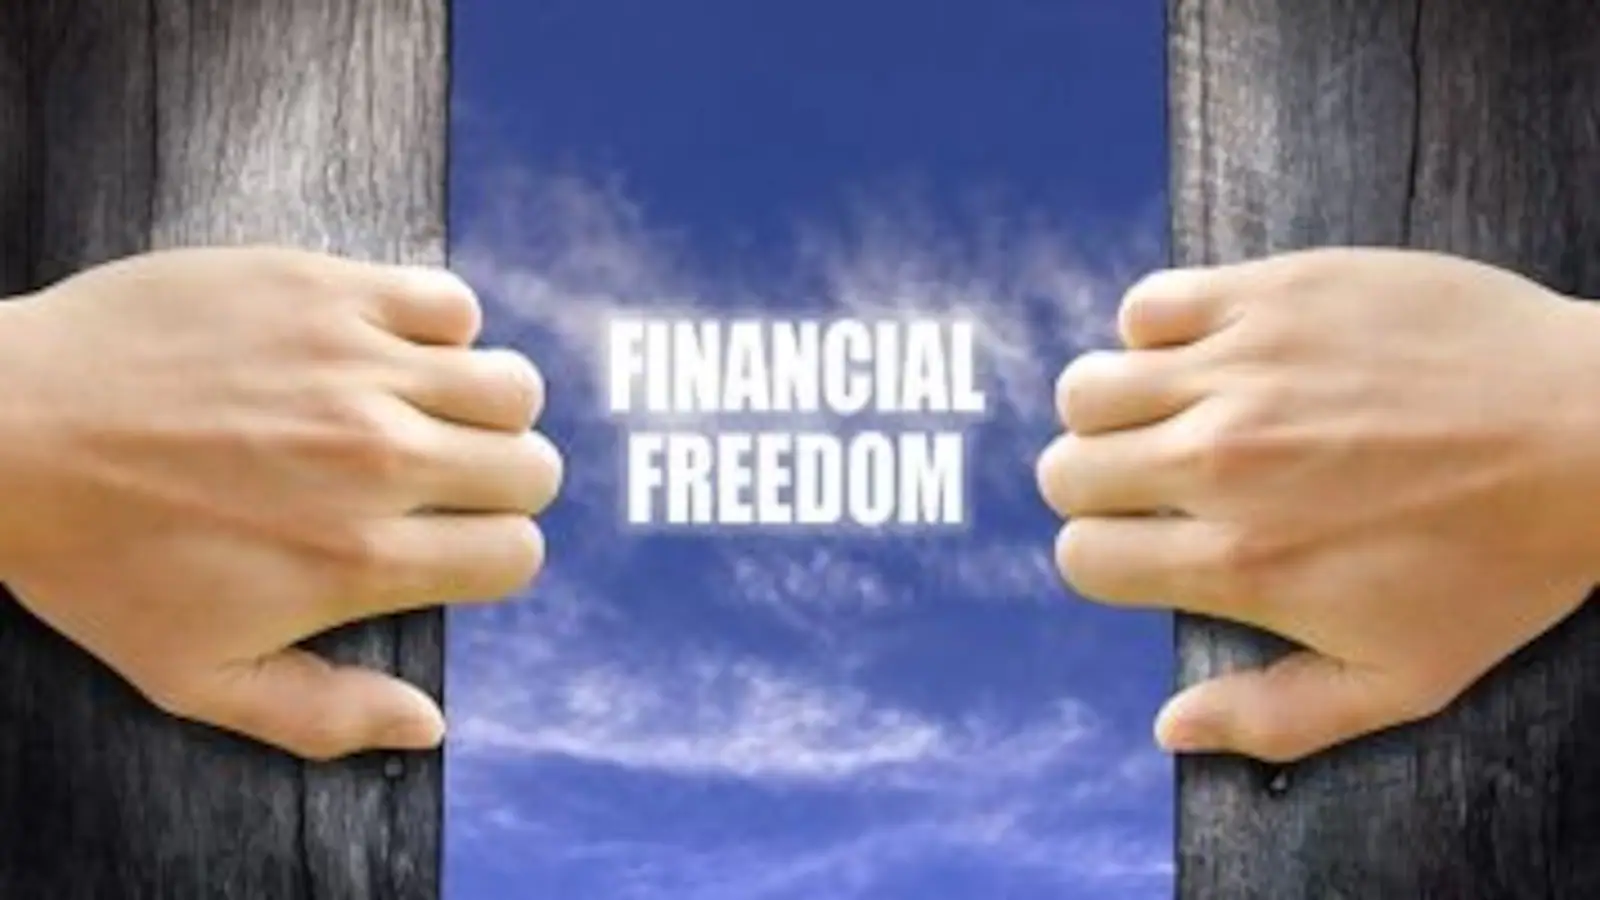 Ultimate Bliss Global Movement for Financial Freedom & Prosperity